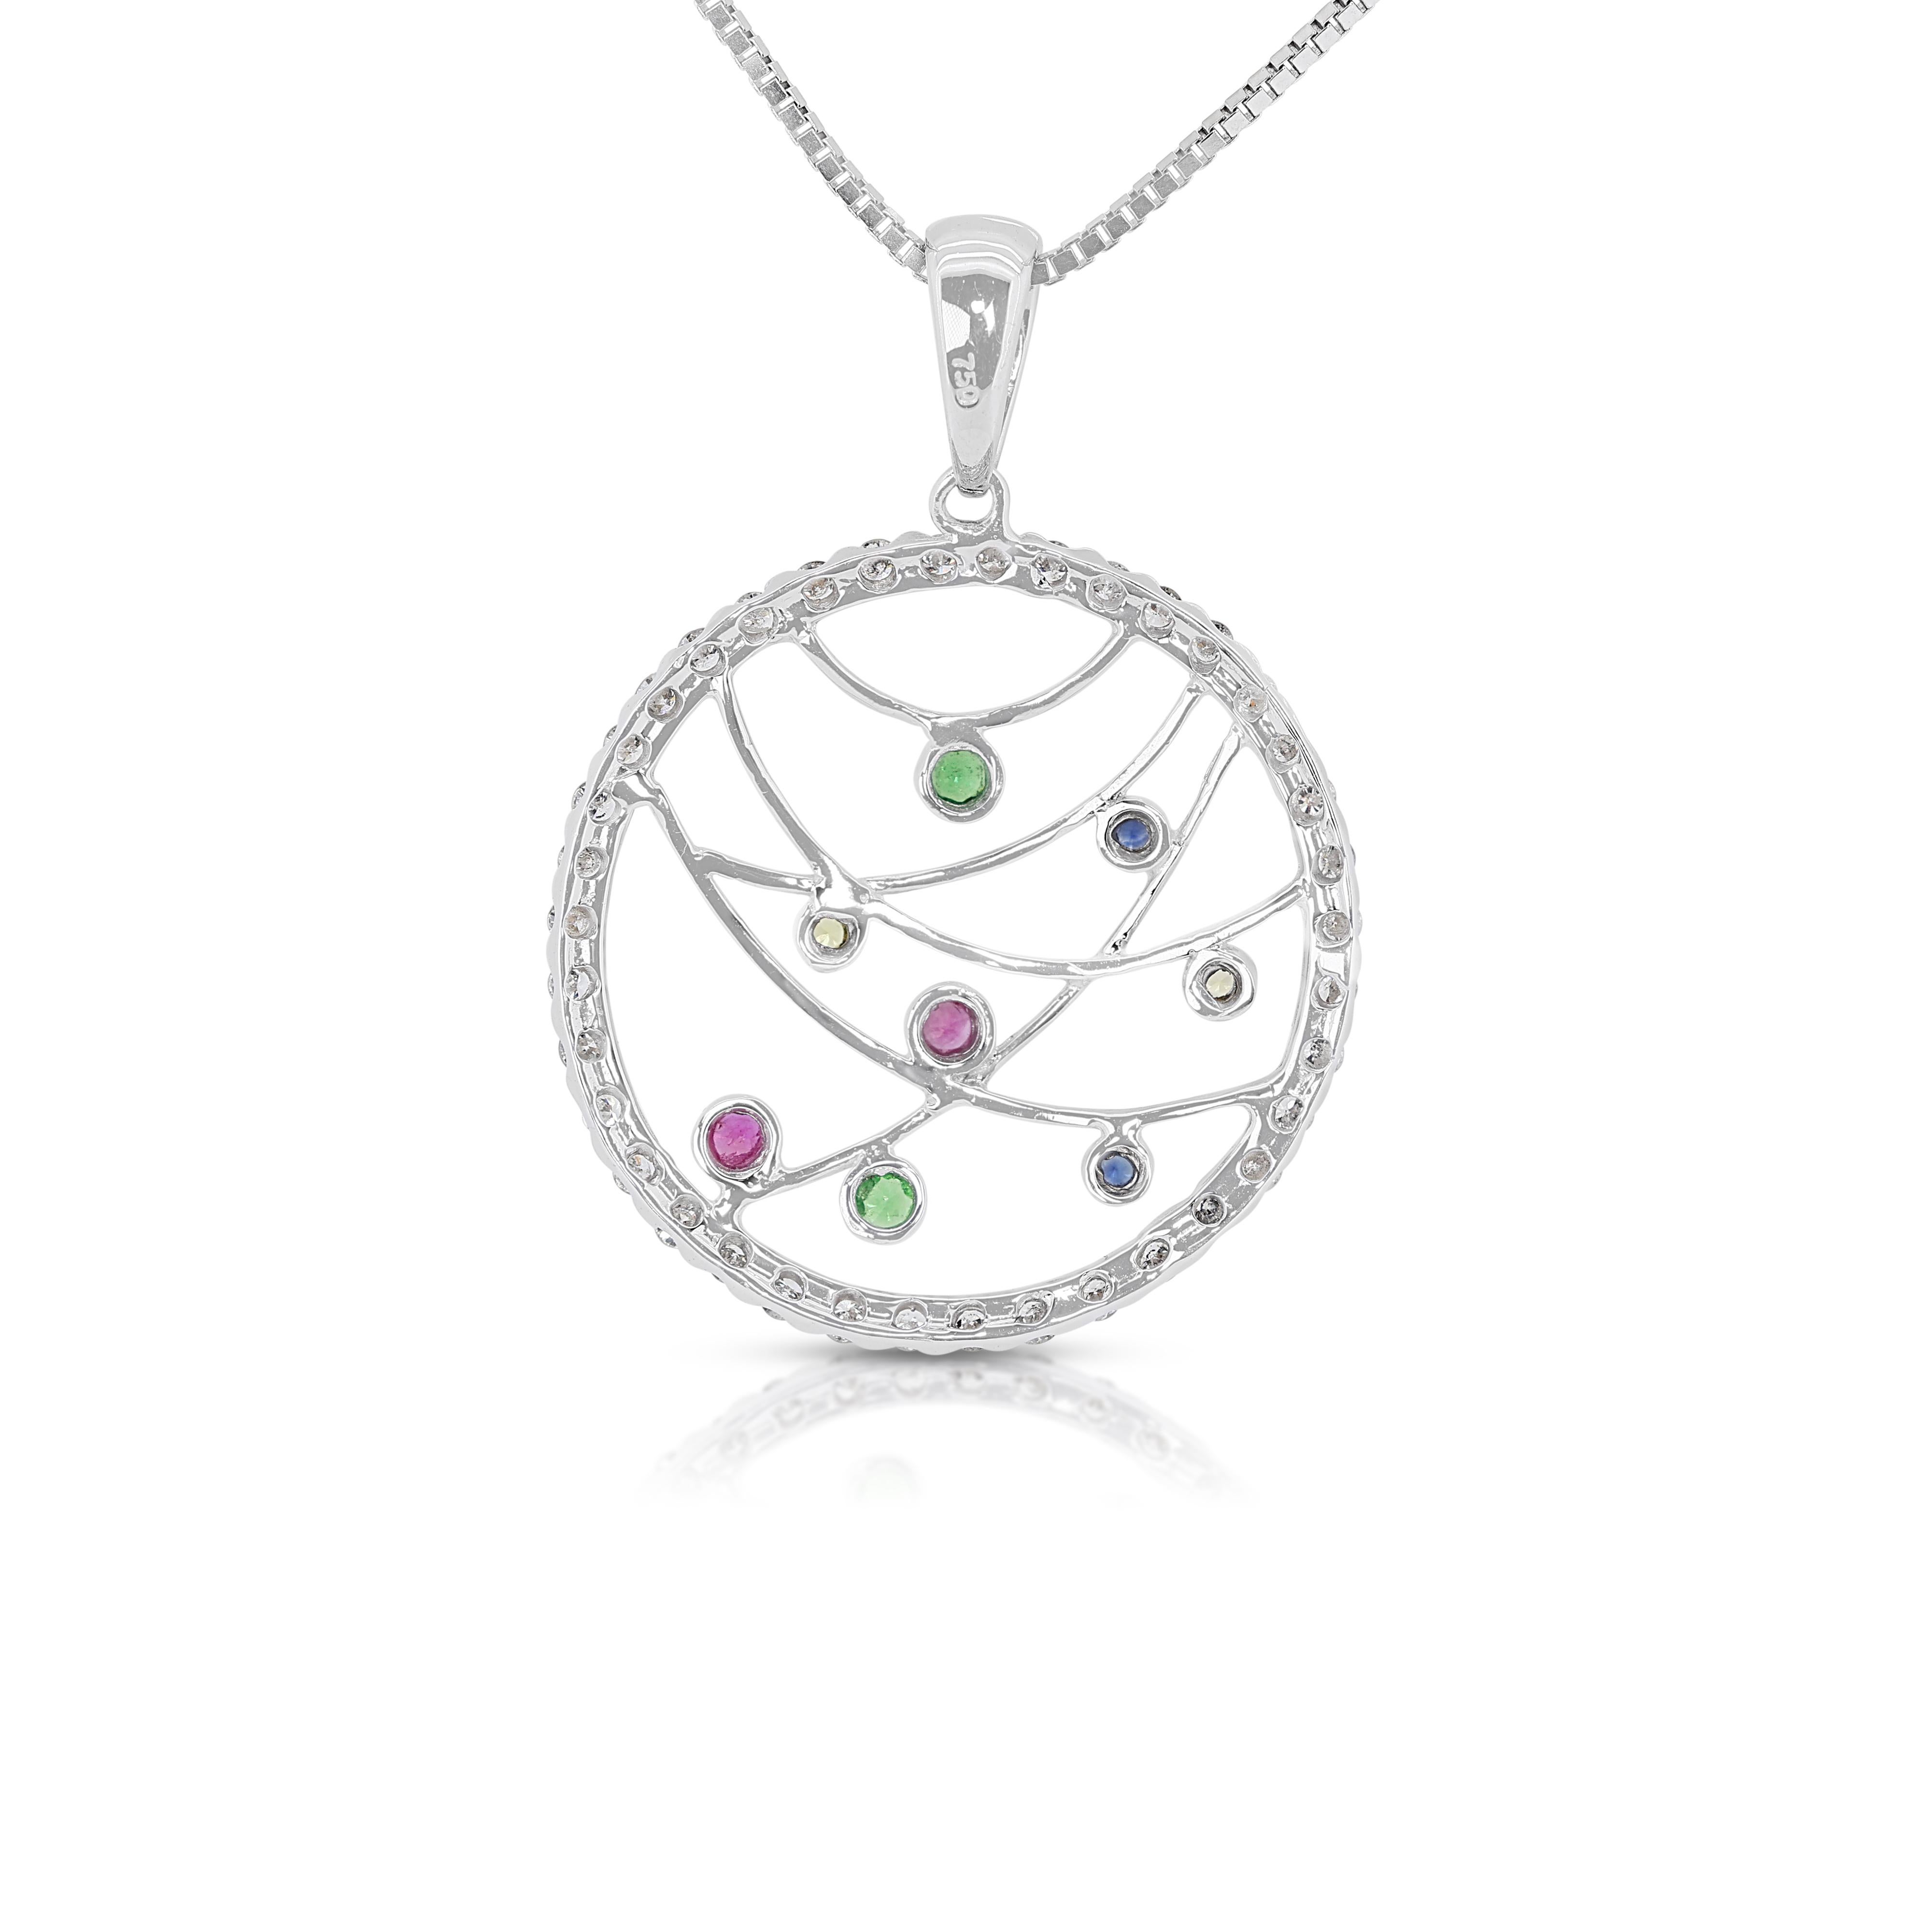 Dazzling 0.62ct Mixed Stones w/ Diamonds in 18K White Gold (Chain Not Included) For Sale 1